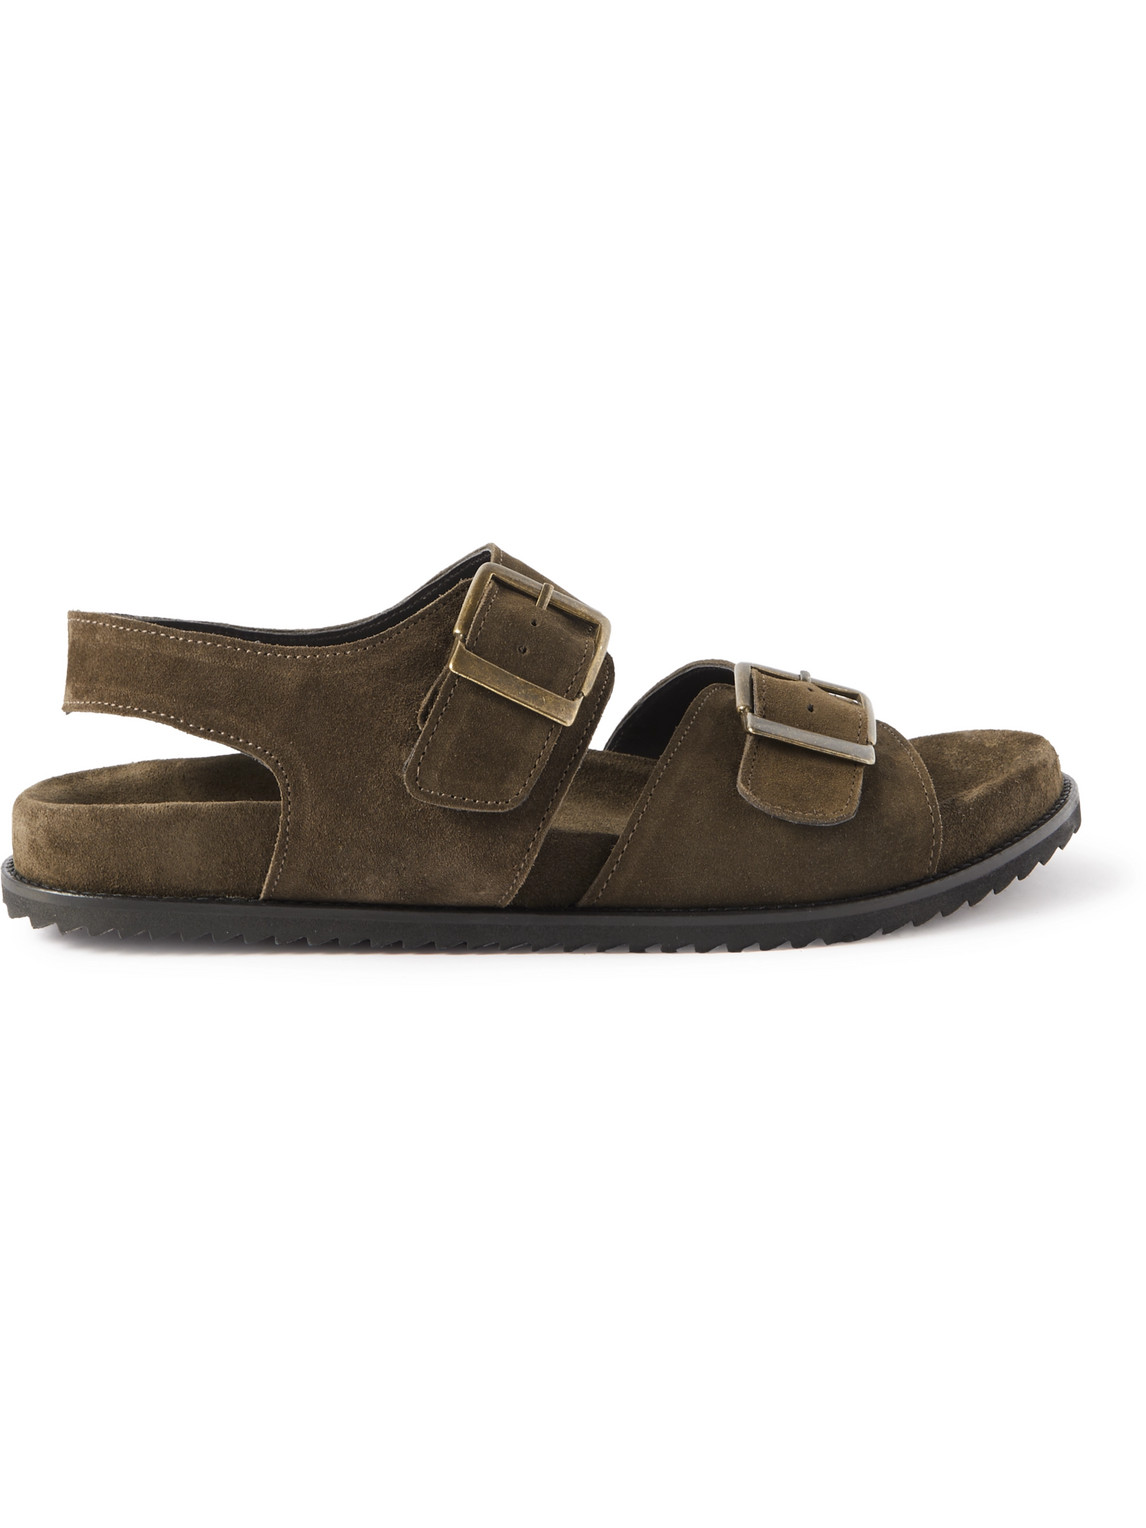 Mr P David Buckled Regenerated Suede By Evolo® Sandals In Brown